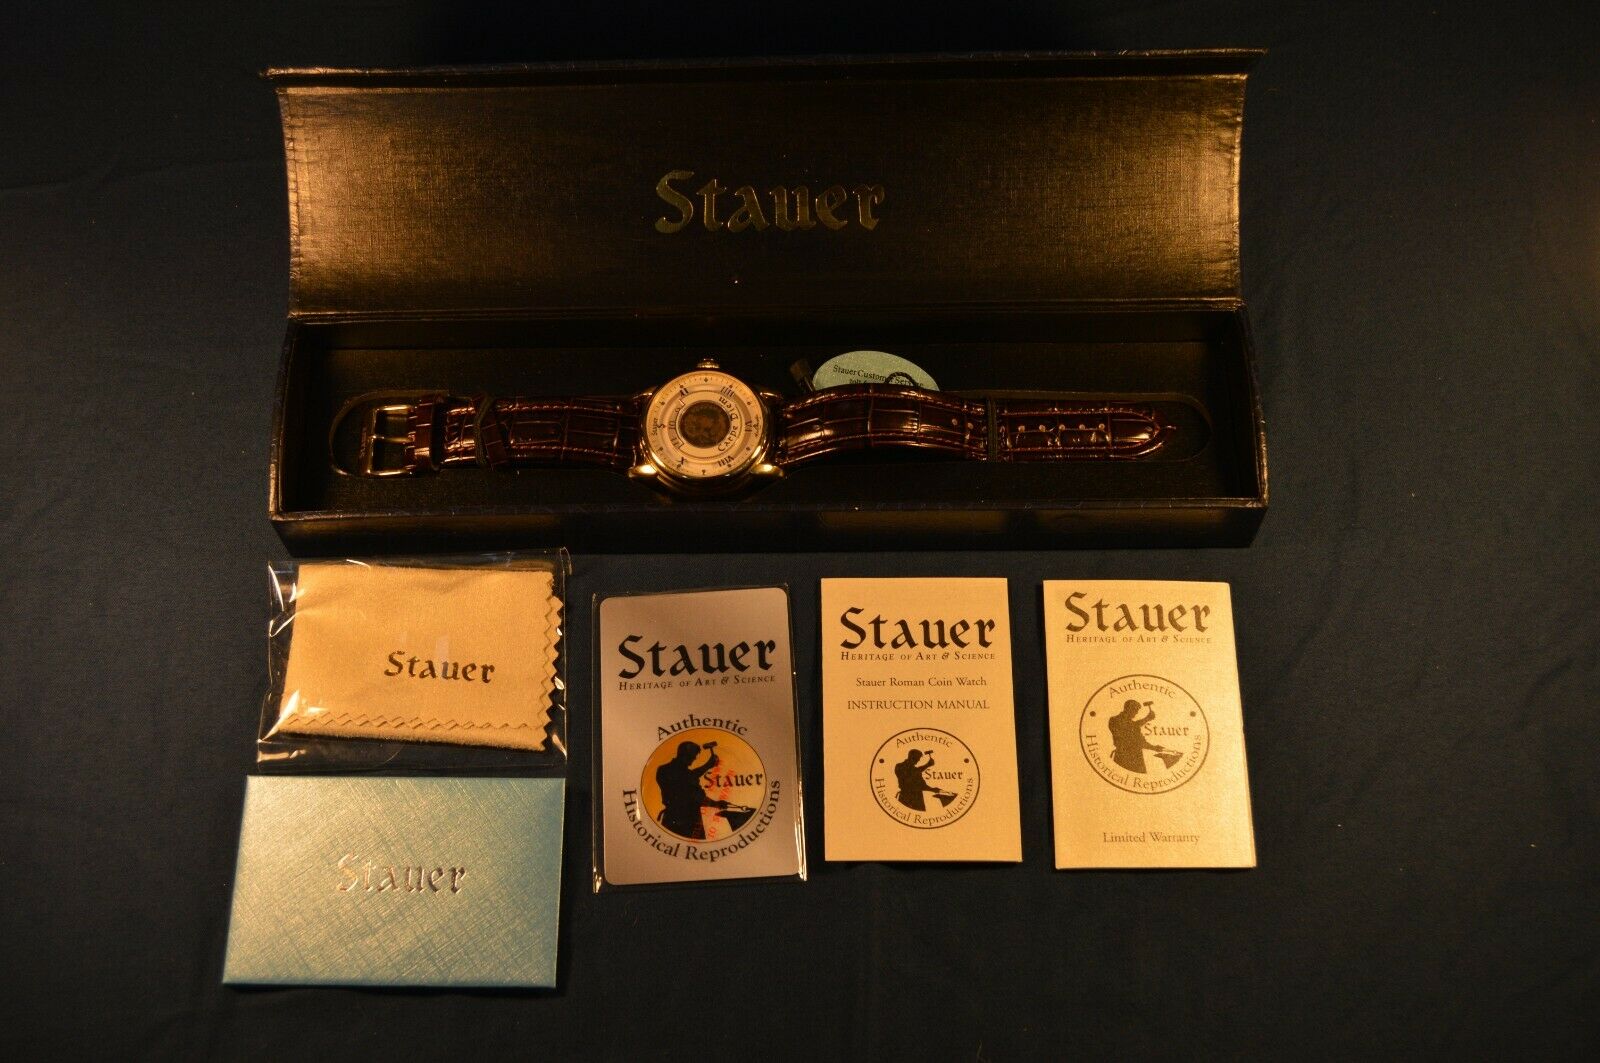 Stauer Roman Coin Watch Self-Winding 19258 3 ATM Water Resistant